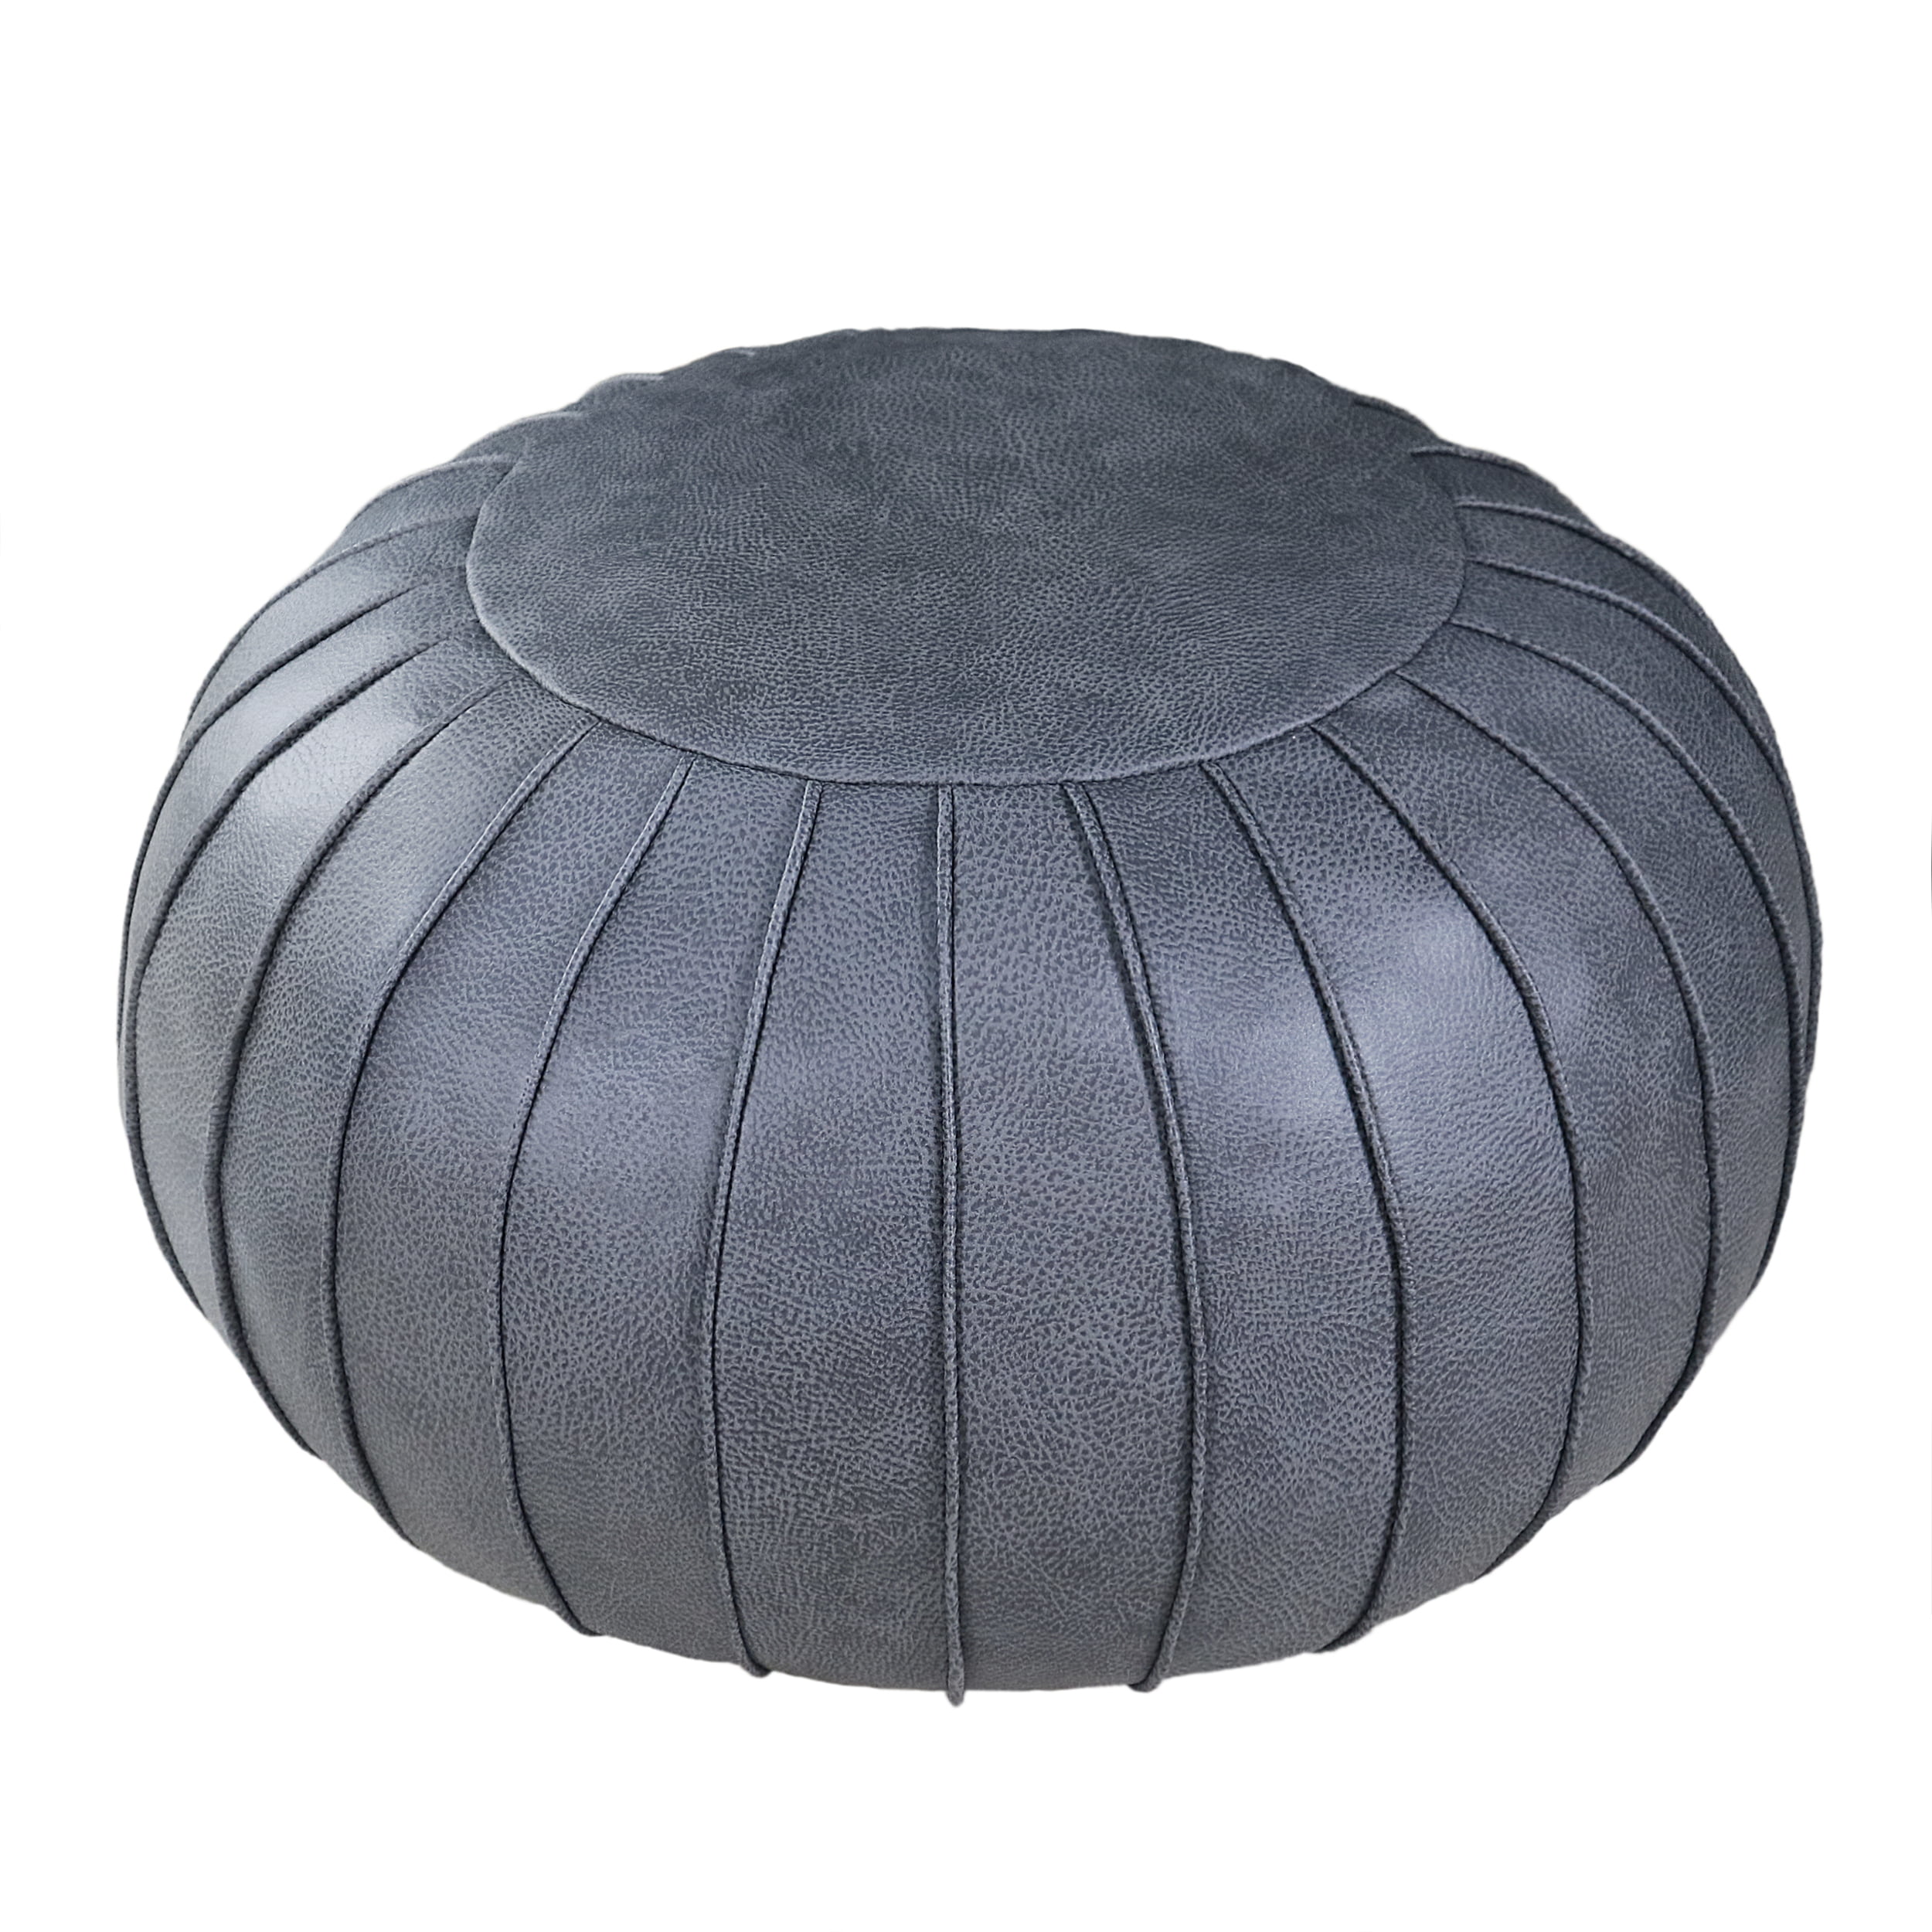 Light Grey ROTOT Decorative Pouf Cover Foot Rest Shell Bean Bag Chair Ottoman Unstuffed & Empty Footstool Storage Solution or Wedding Gifts